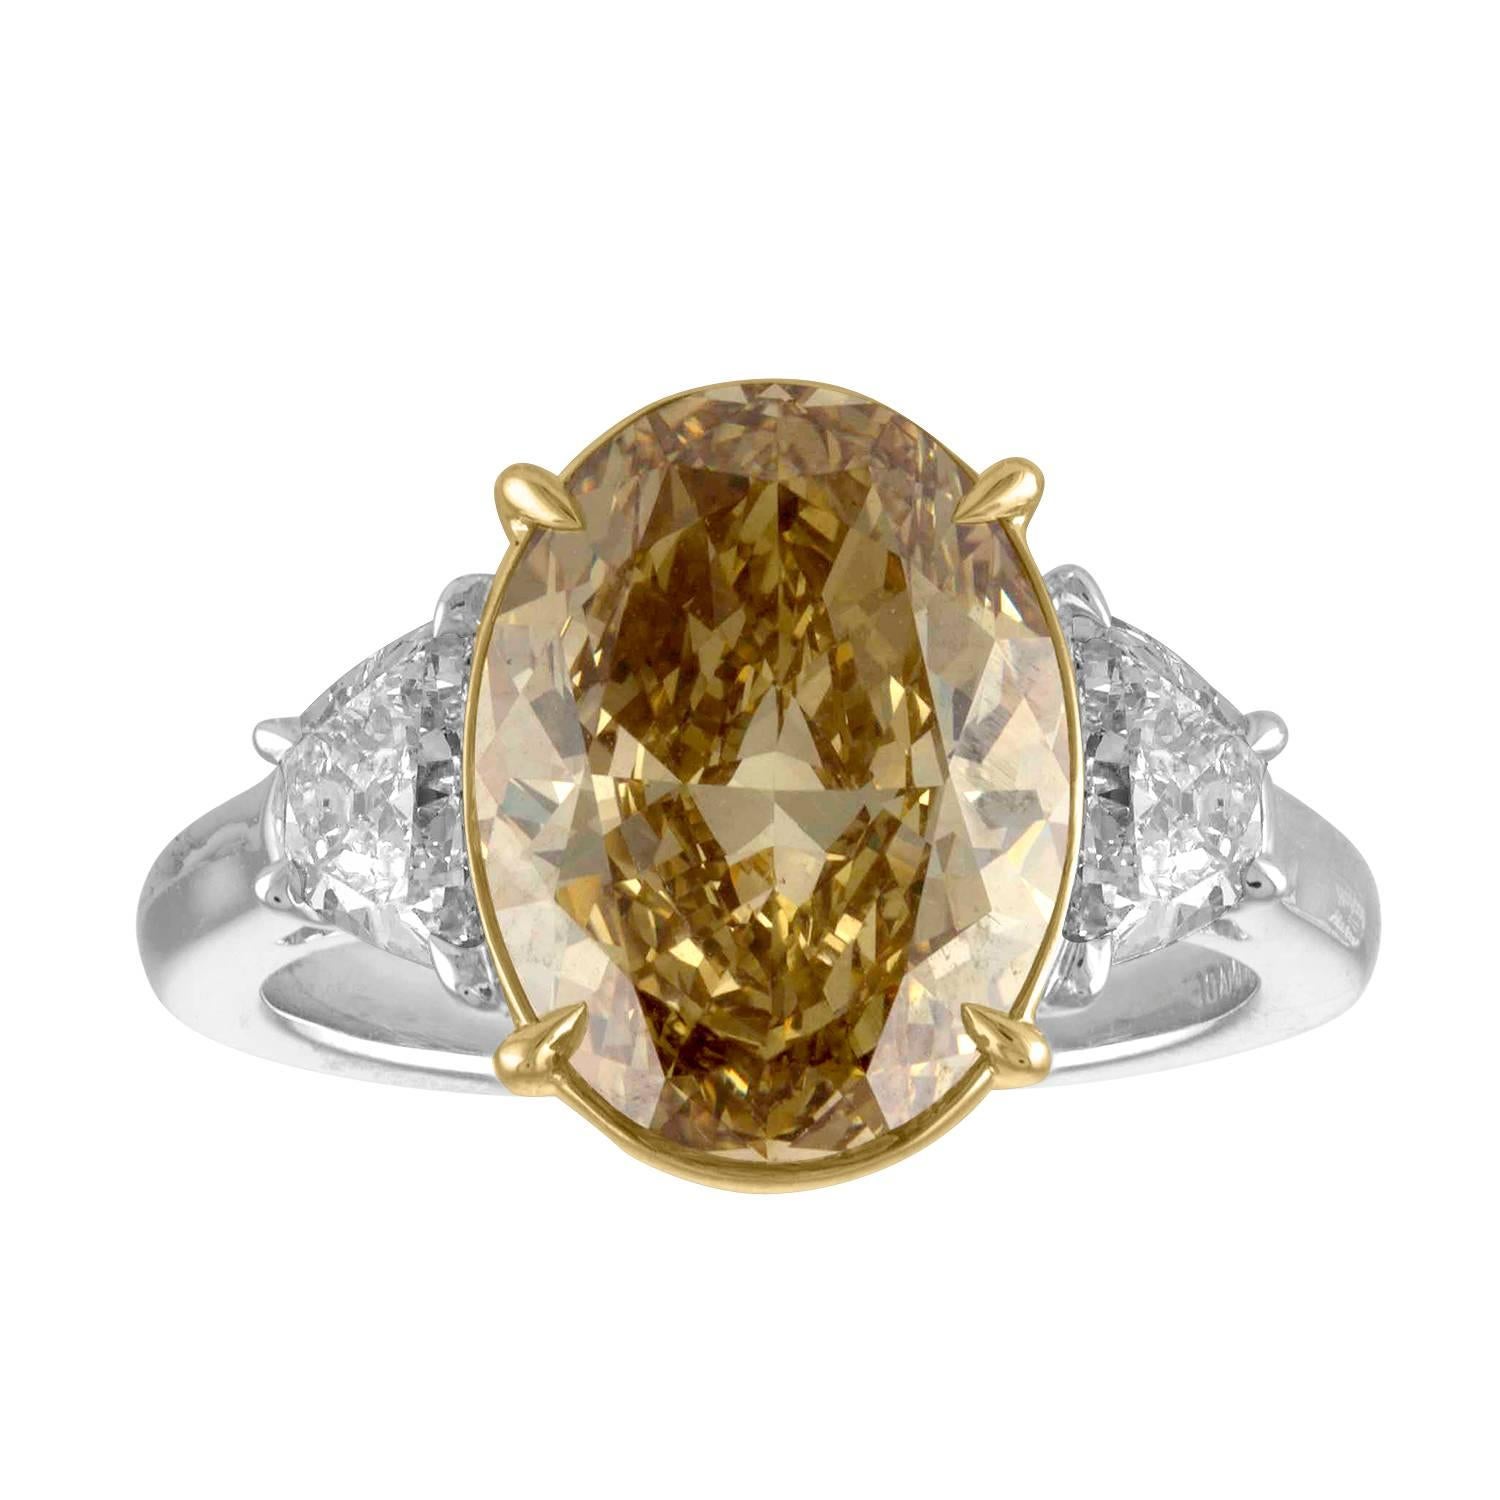 5.05 Carat Oval GIA Certified Set in Two-Tone Three Stones Ring